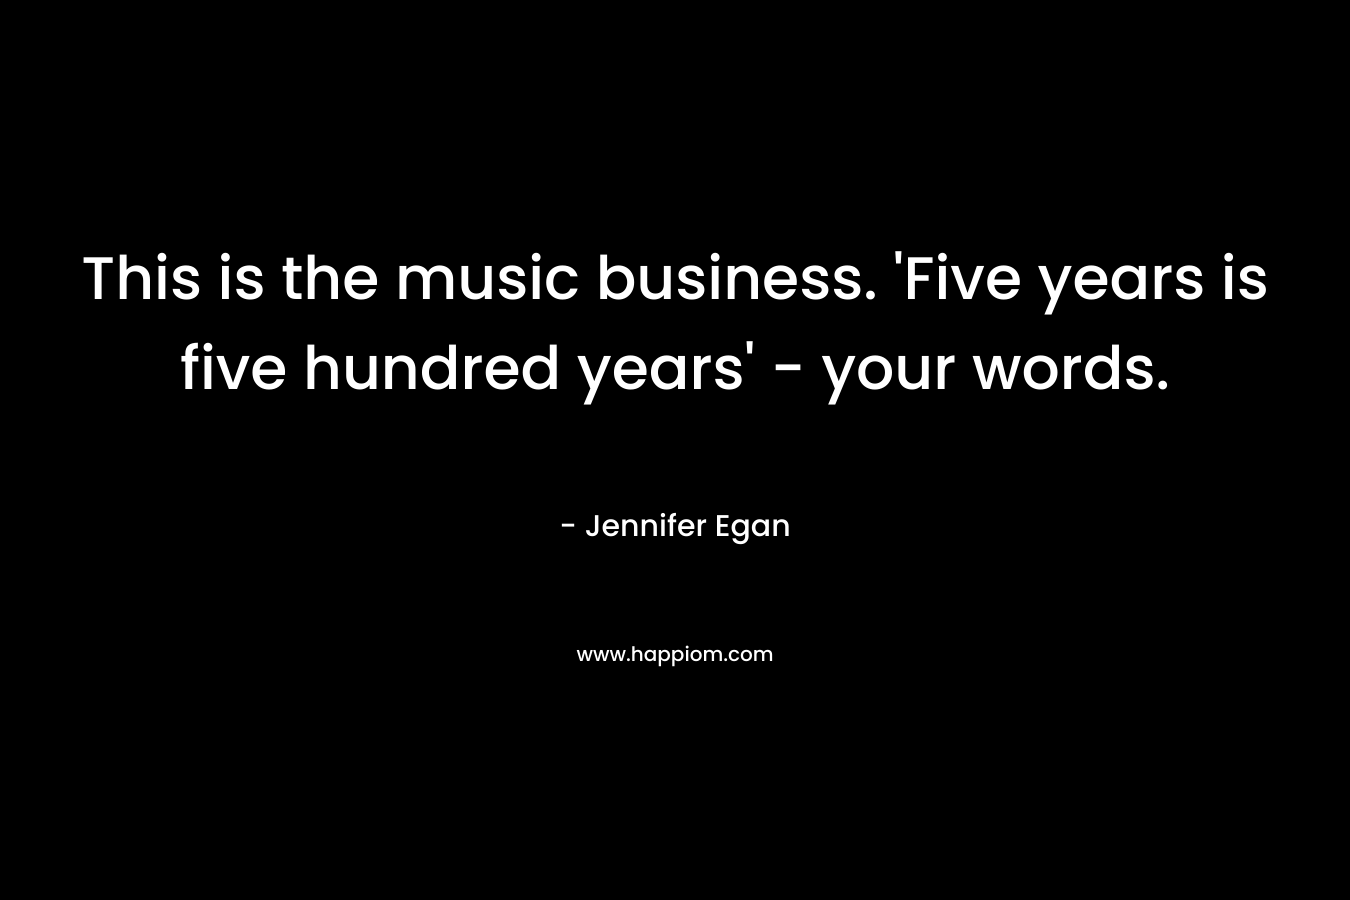 This is the music business. 'Five years is five hundred years' - your words.